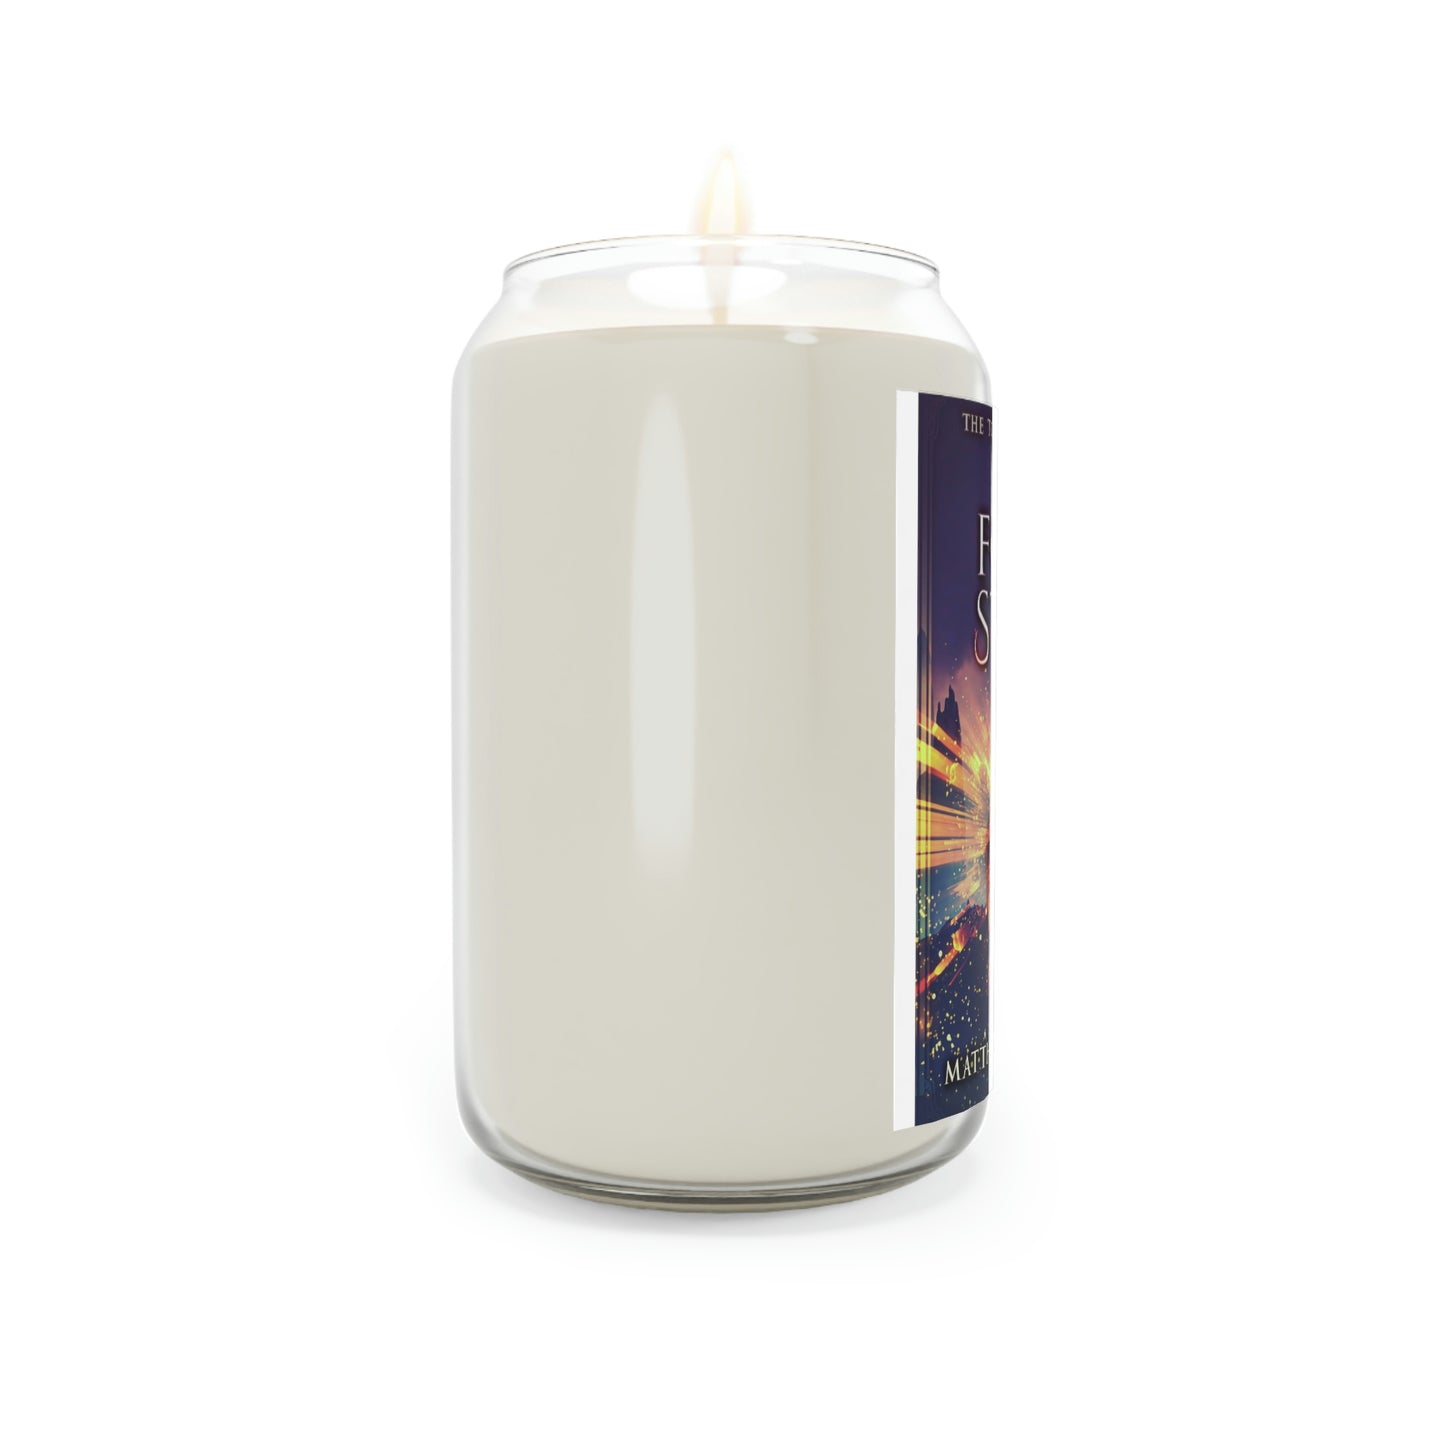 The Focus Stone - Scented Candle